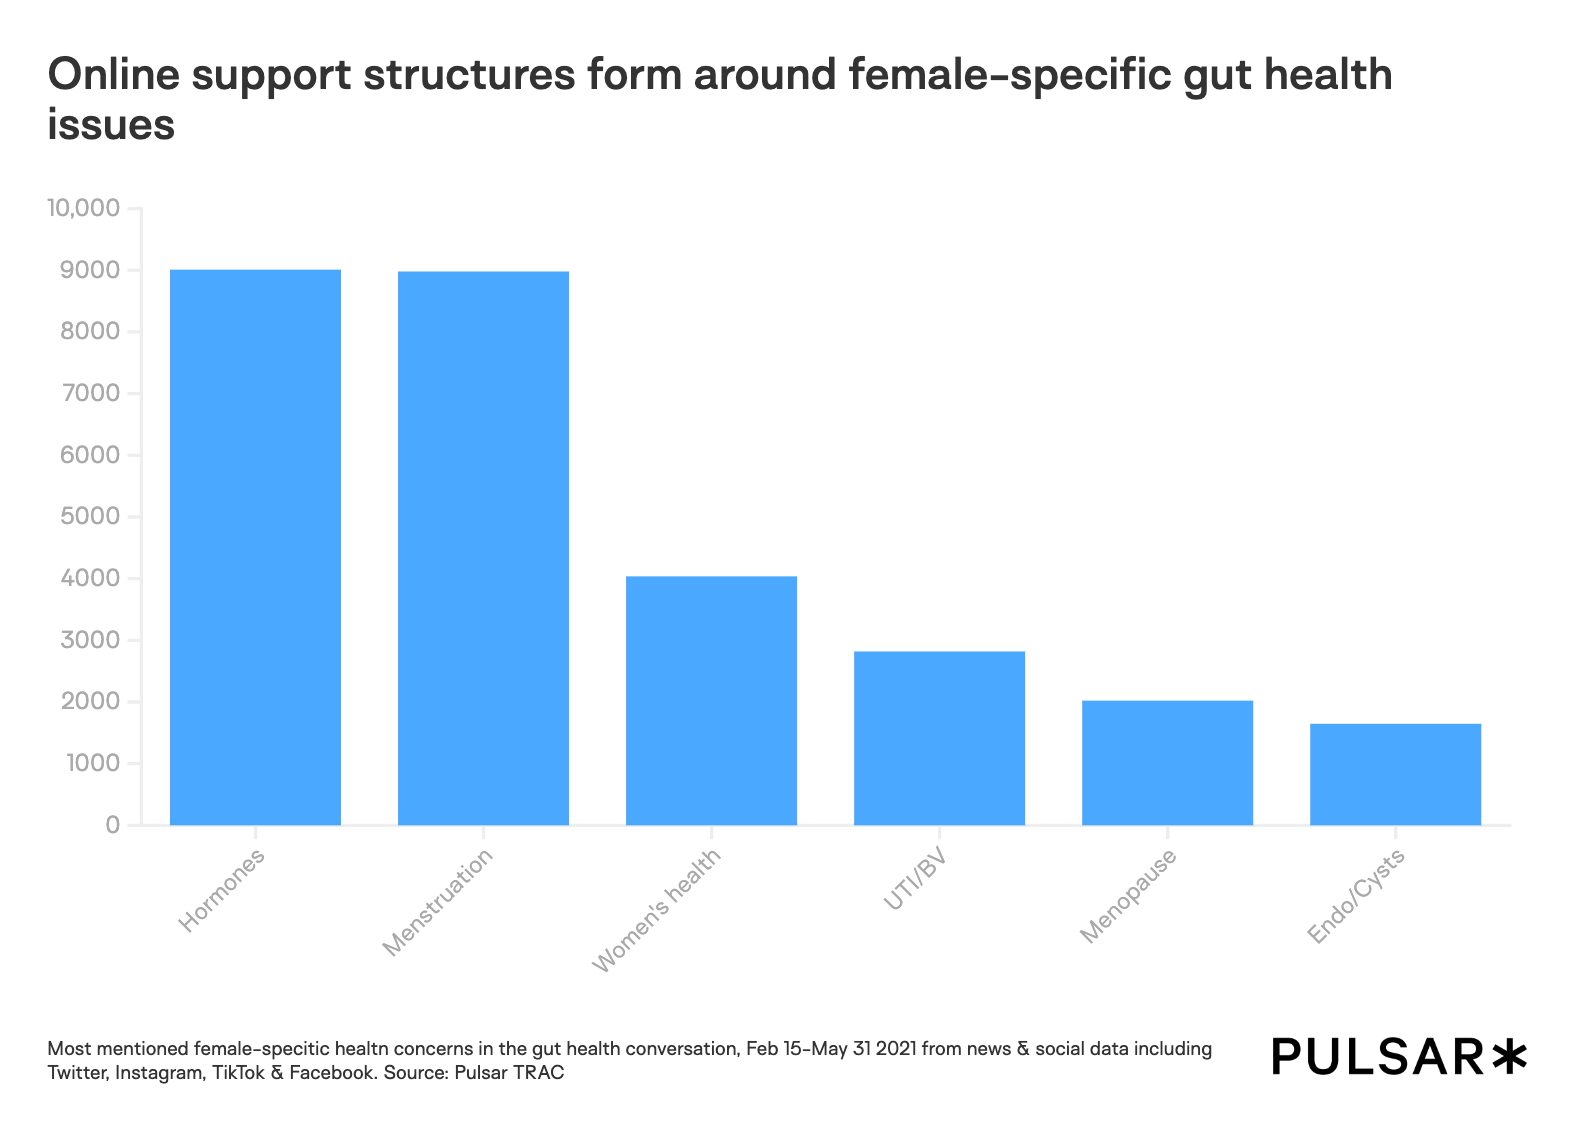 Online support structures form around female-specific gut health issues